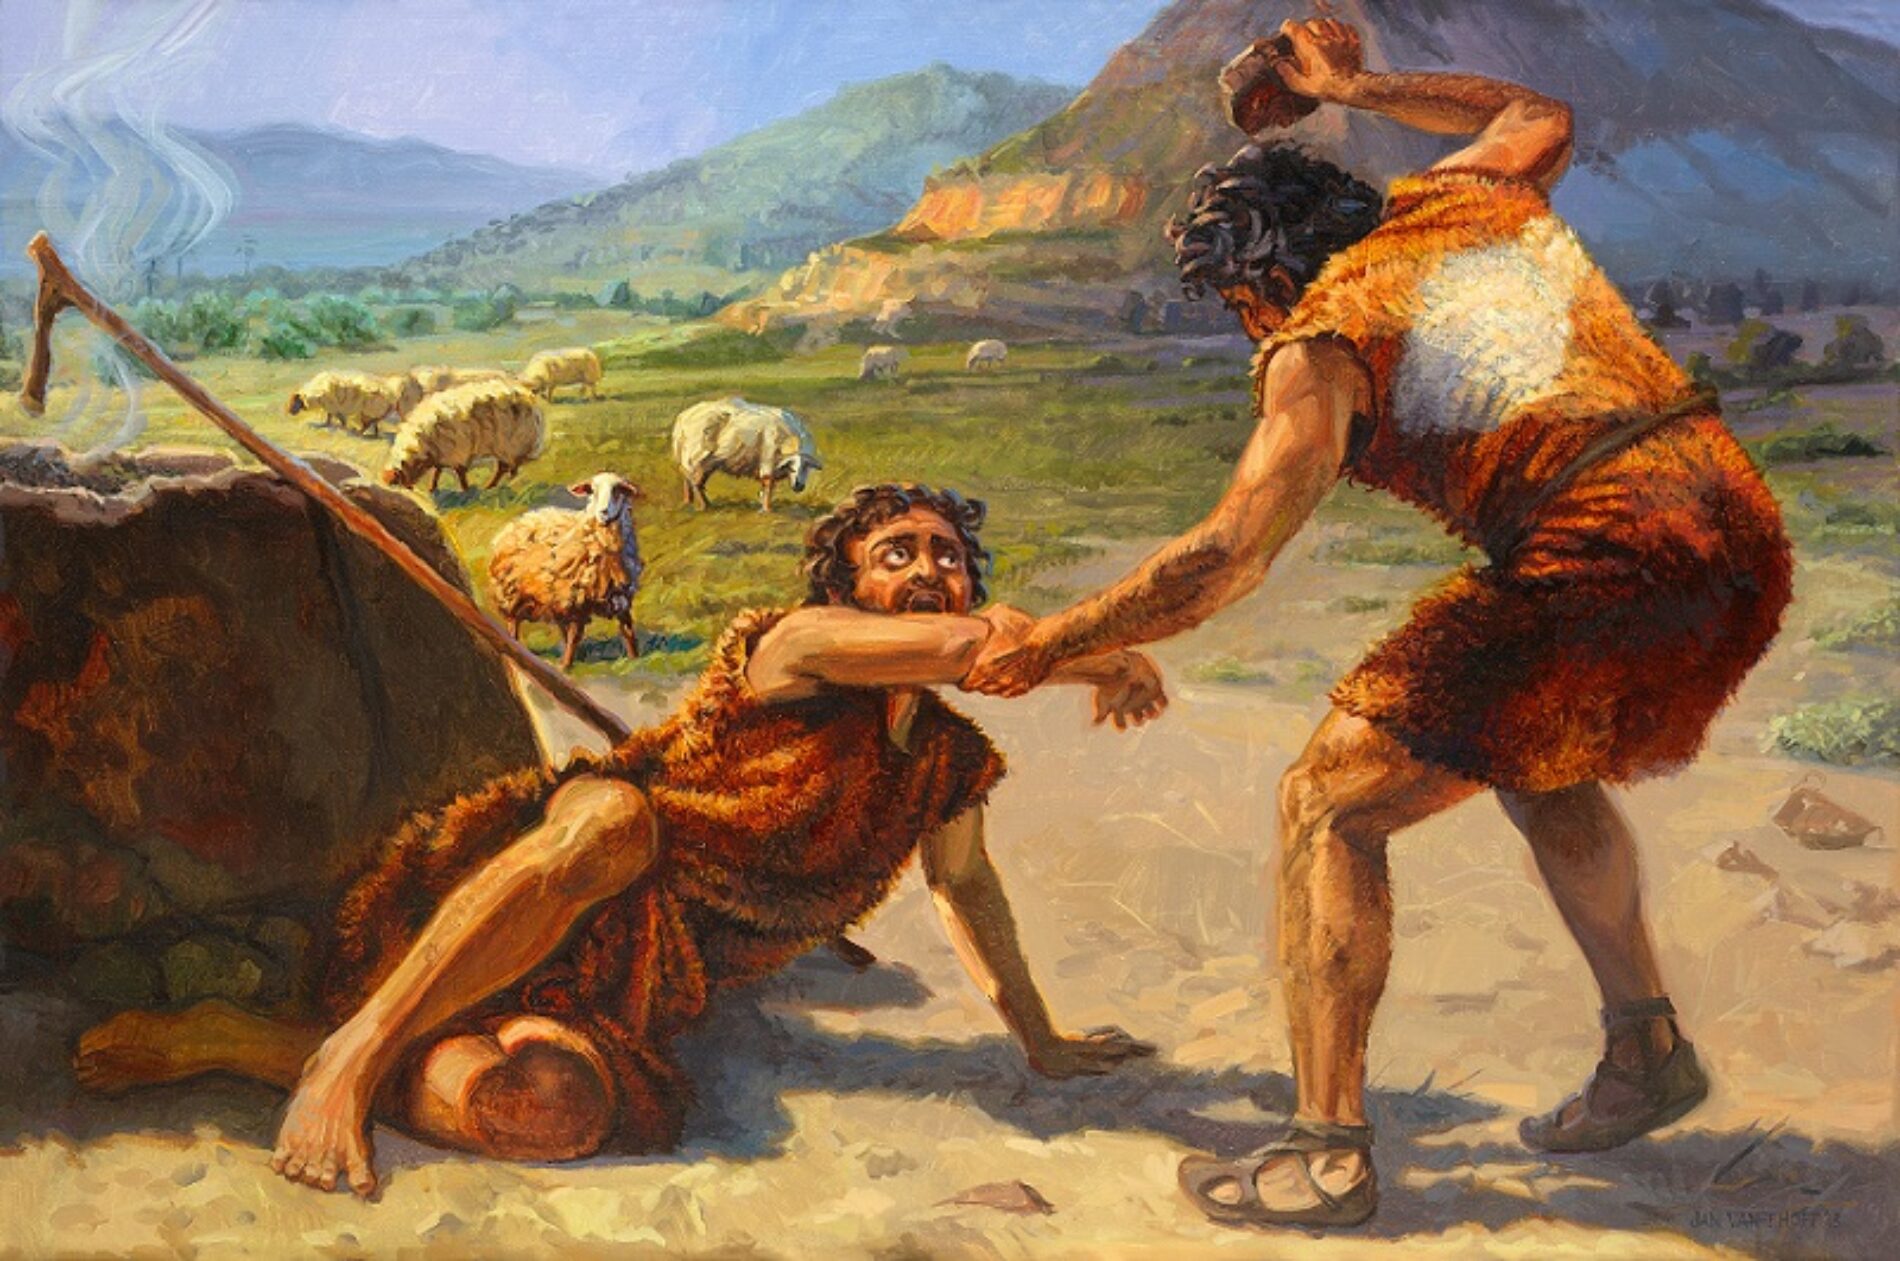 About Cain and Abel (A KDian’s Perspective)